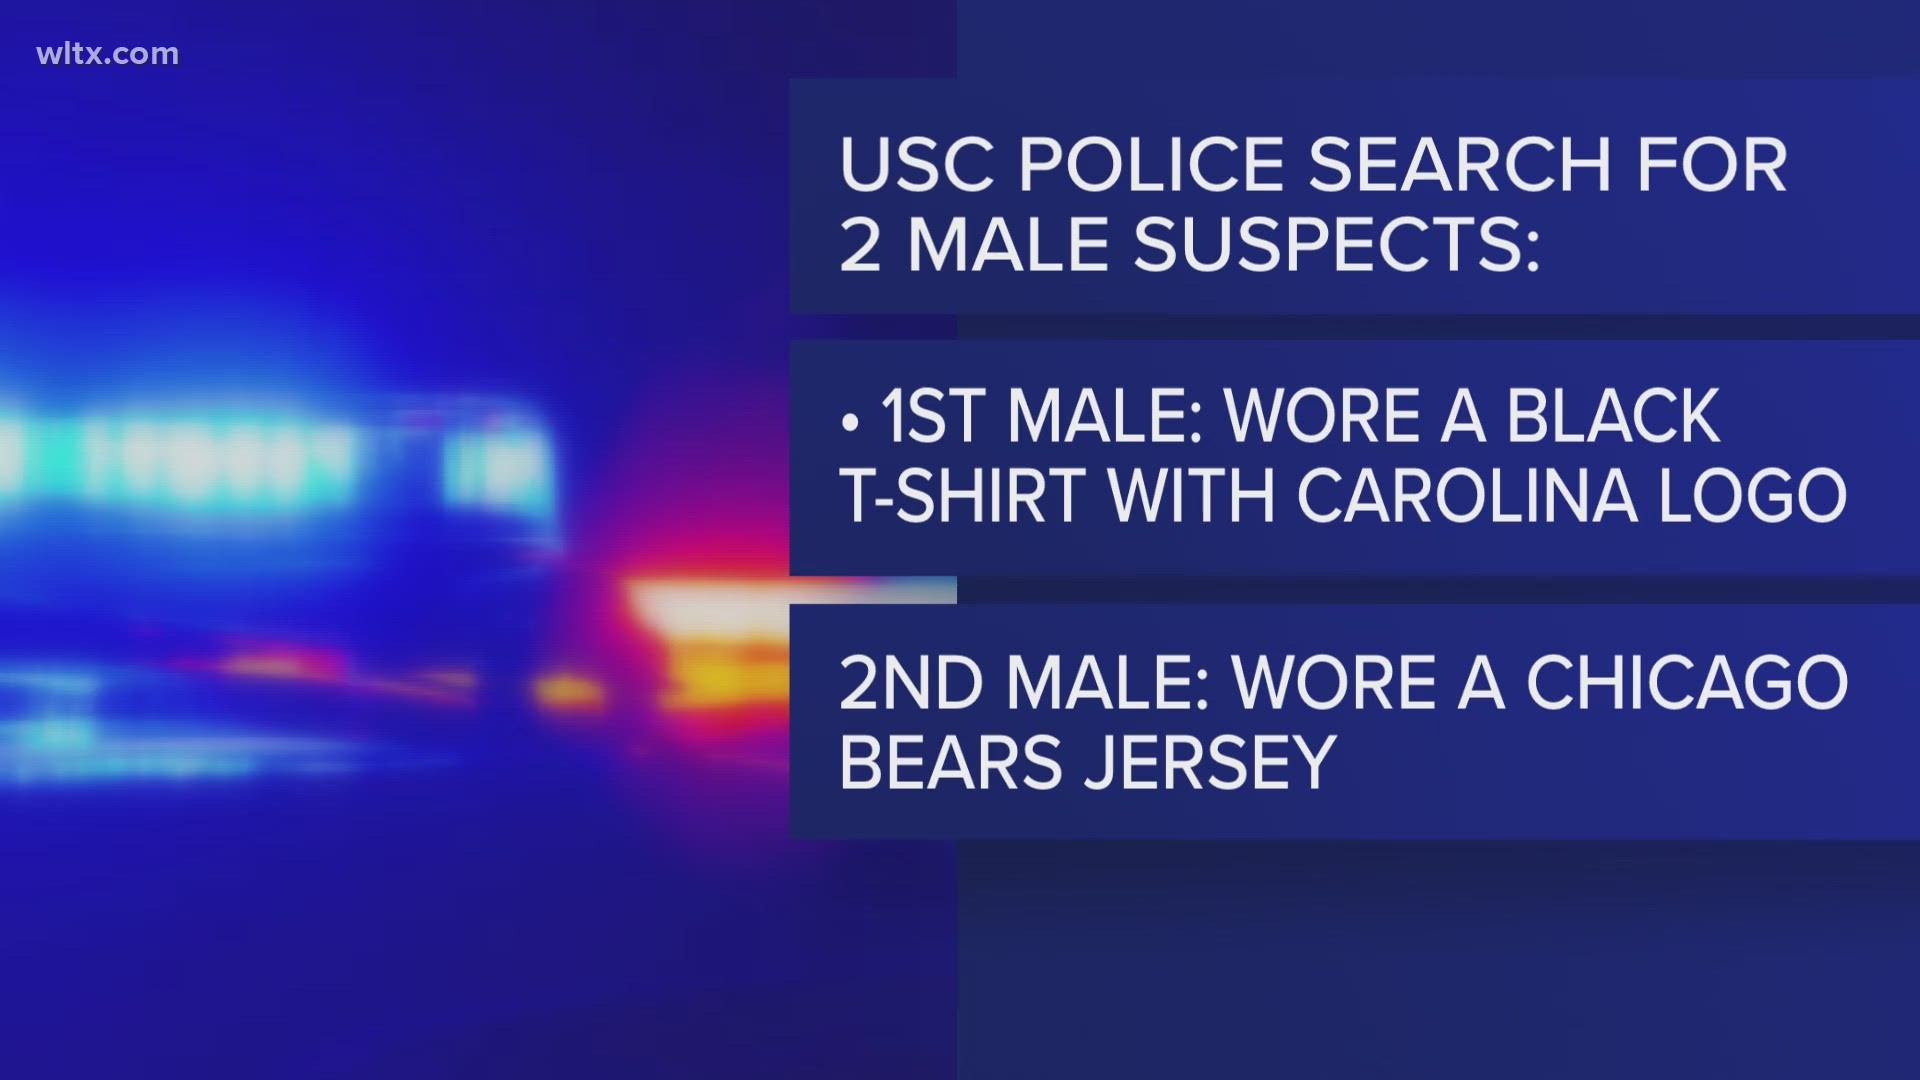 The University of South Carolina Police Department warned the campus community to remain vigilant following an alleged sexual assault on Saturday.